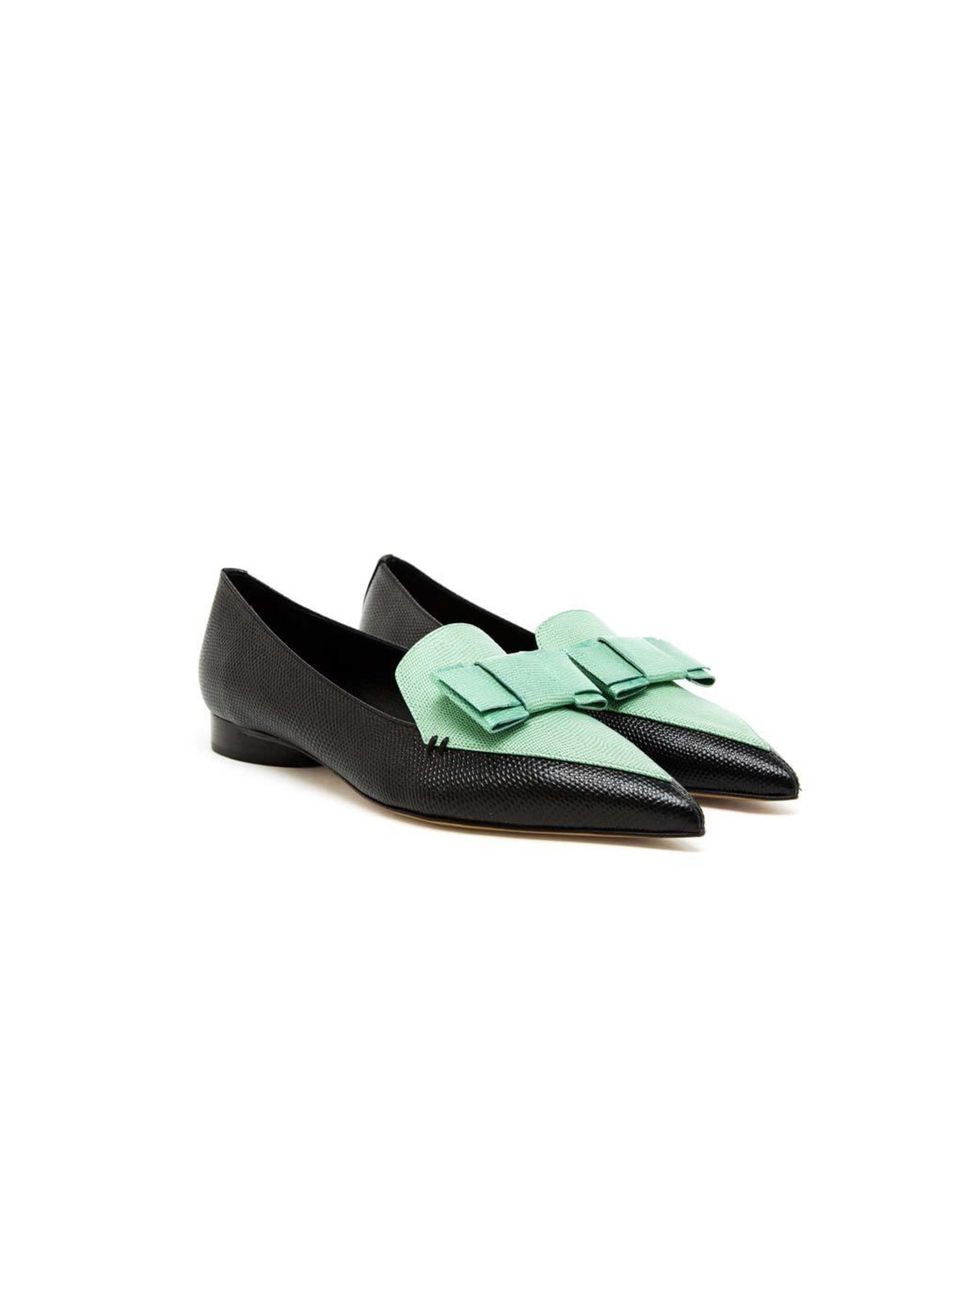 <p>Nicolas Kirkwood, £420, <a href="http://www.brownsfashion.com/product/LS8R52730003/183/erdem-lizard-embossed-leather-loafers">brownsfashion.com</a></p>